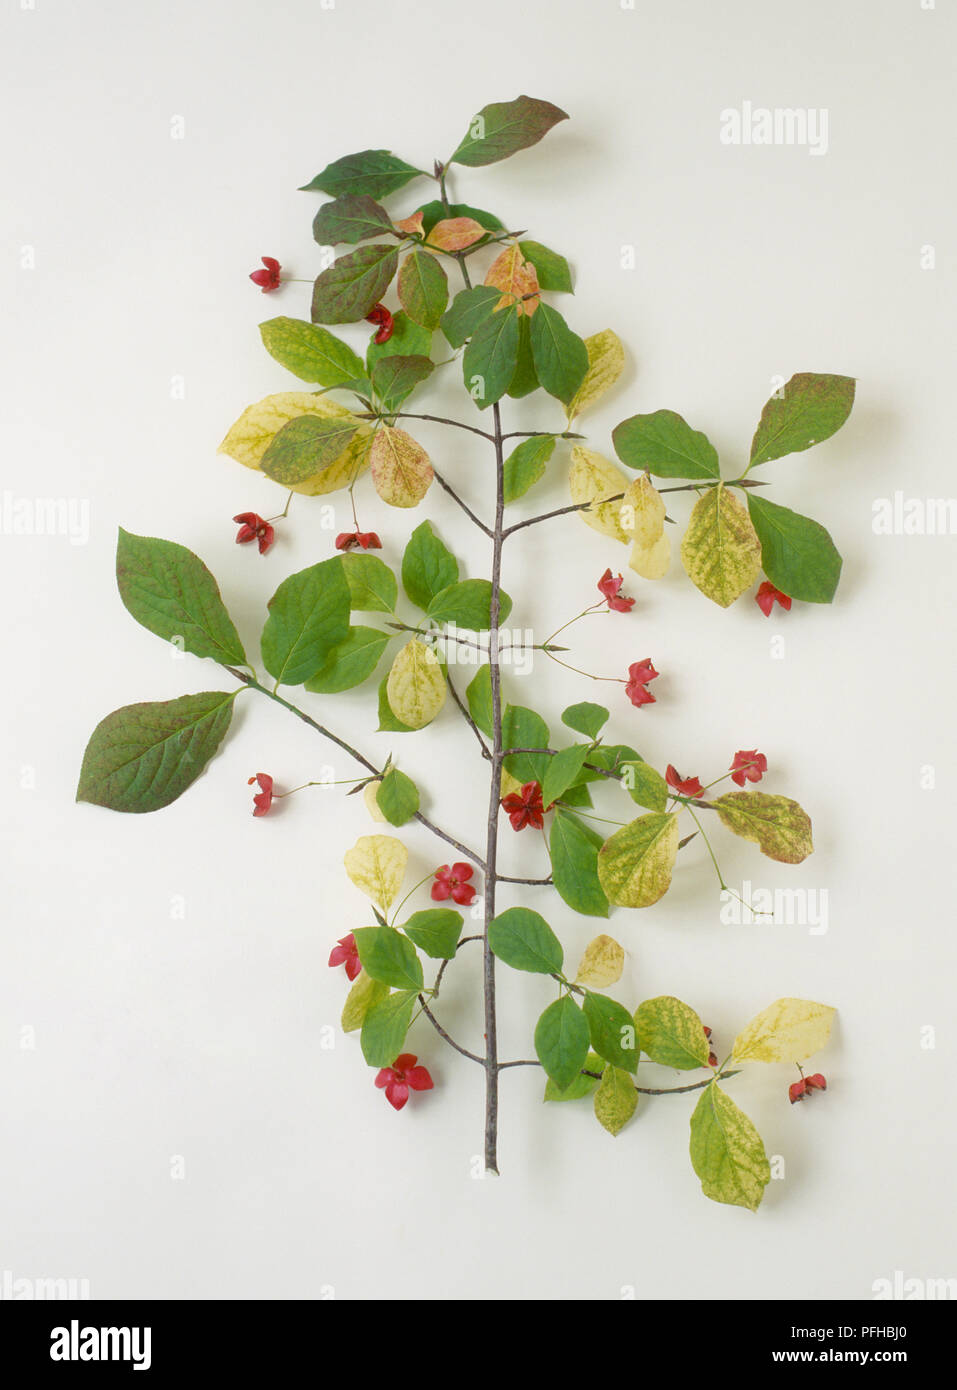 Branch from Euonymus planipes (Spindle tree) showing small red flowers Stock Photo